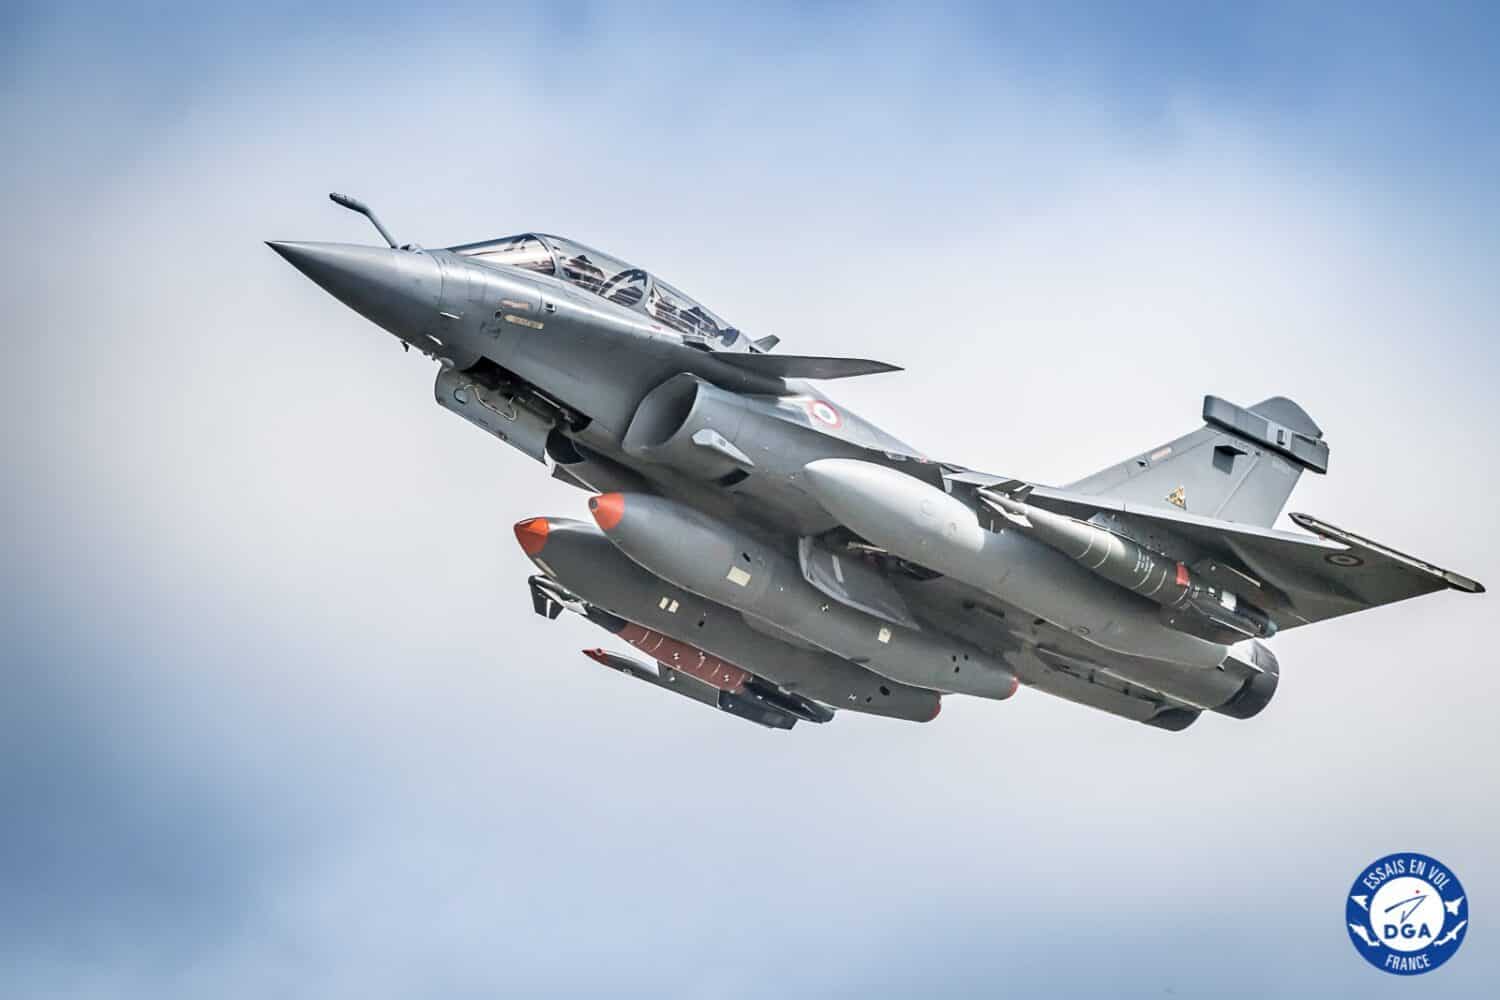 Dassault Rafale in its new version, the F4, will have a 1000 ton AASM 1 bomb, guided by GPS. Image: DGA.